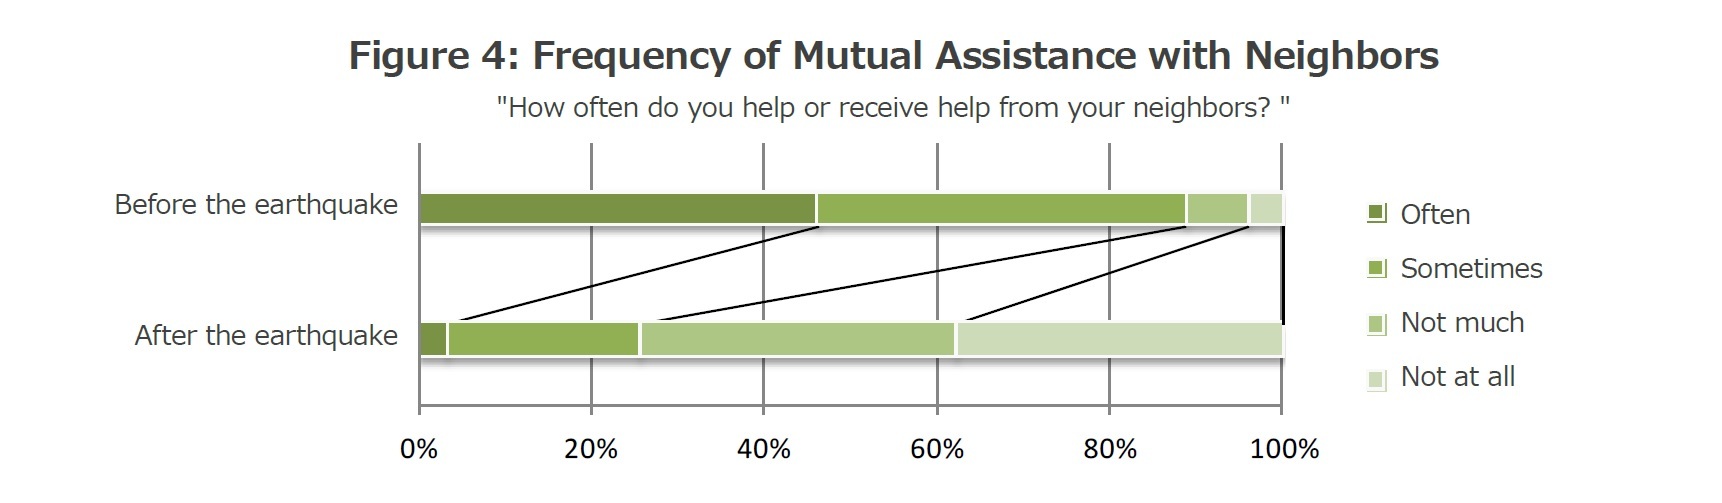 Figure 4: Frequency of Mutual Assistance with Neighbors